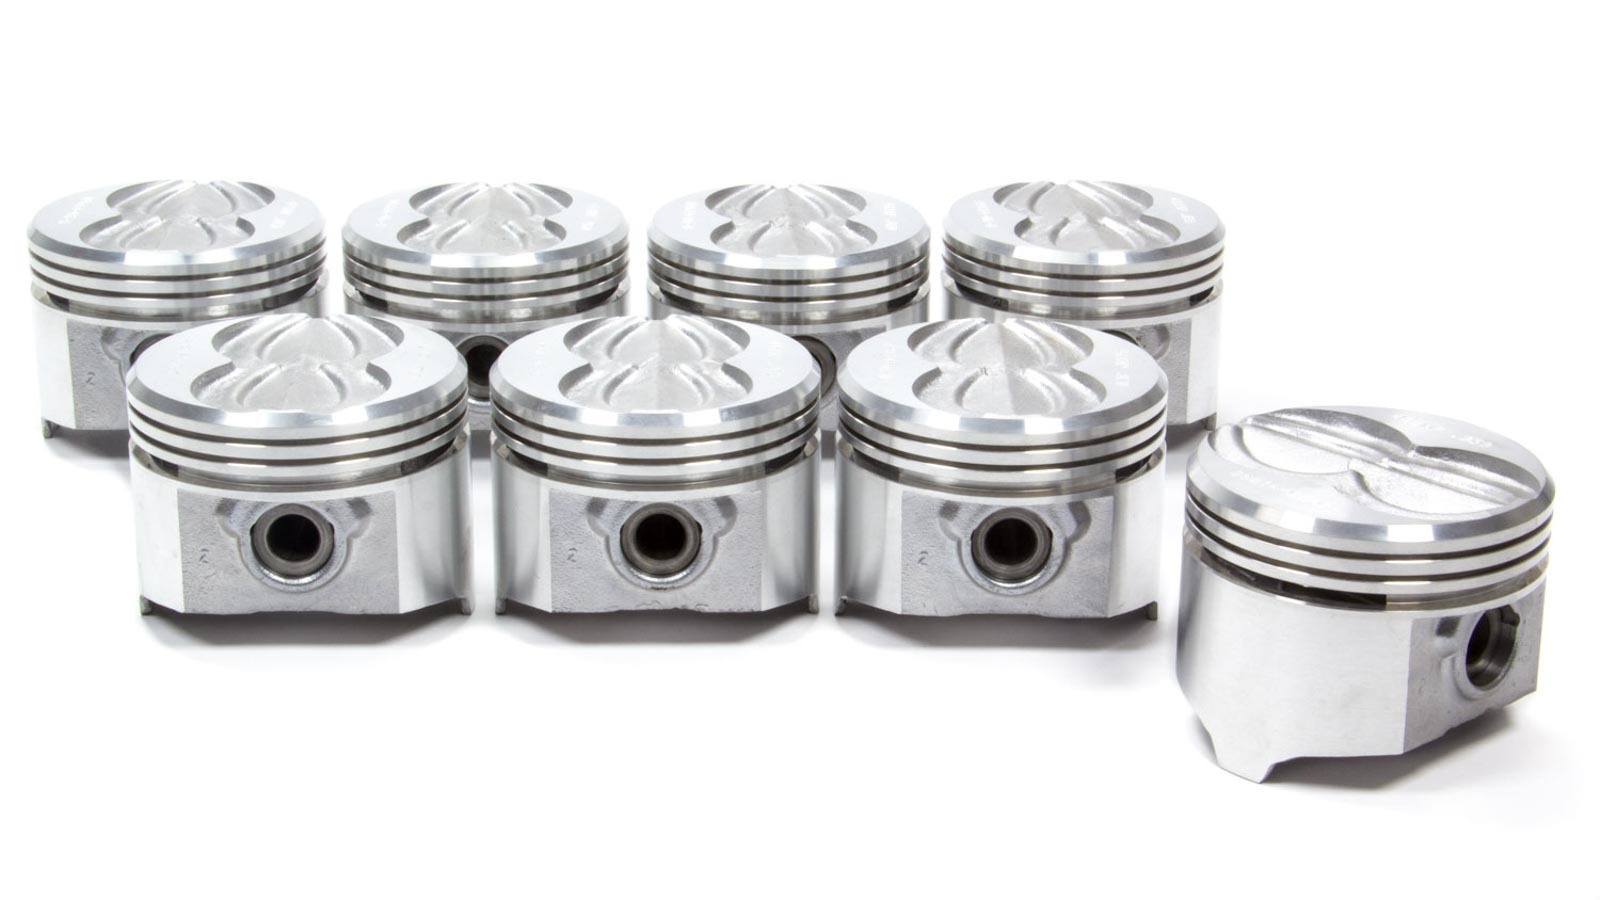 Sealed Power 411NP30 Piston, Cast, 4.150 in Bore, 5/64 x 5/64 x 3/16 in Ring Grooves, Minus 15.00 cc, Pontiac V8, Set of 8